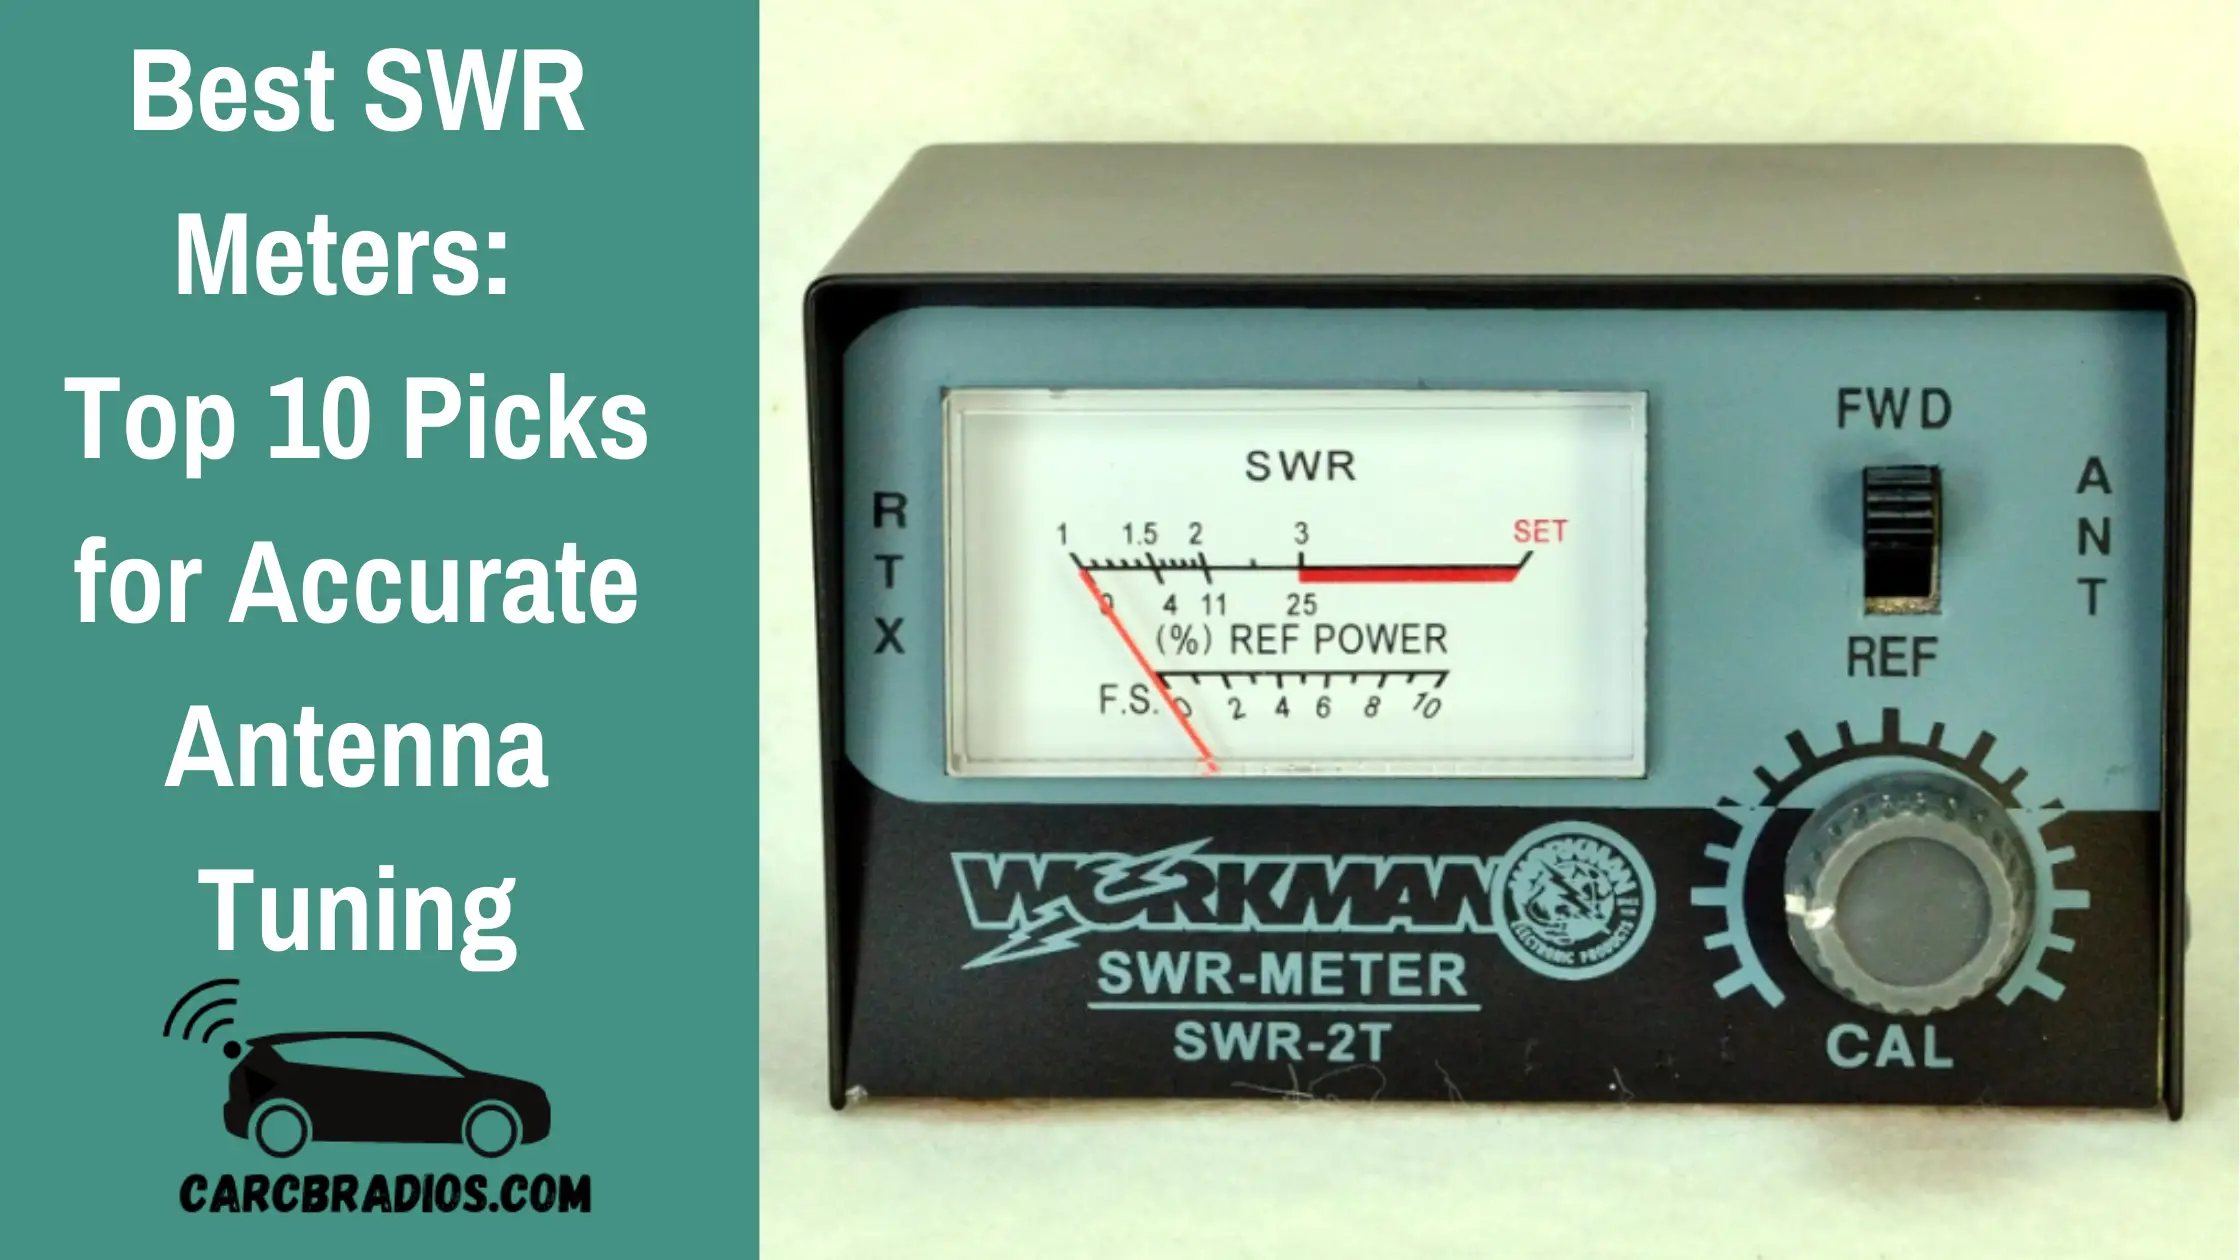 Best SWR Meters: To choose the right SWR meter for your needs, there are several factors you need to consider. The impedance rating, frequency range, and SWR range are some of the most crucial features to look for in an SWR meter. In this article, I will provide you with a list of the best SWR meters available in 2023, along with their reviews and a buying guide to help you make an informed decision.